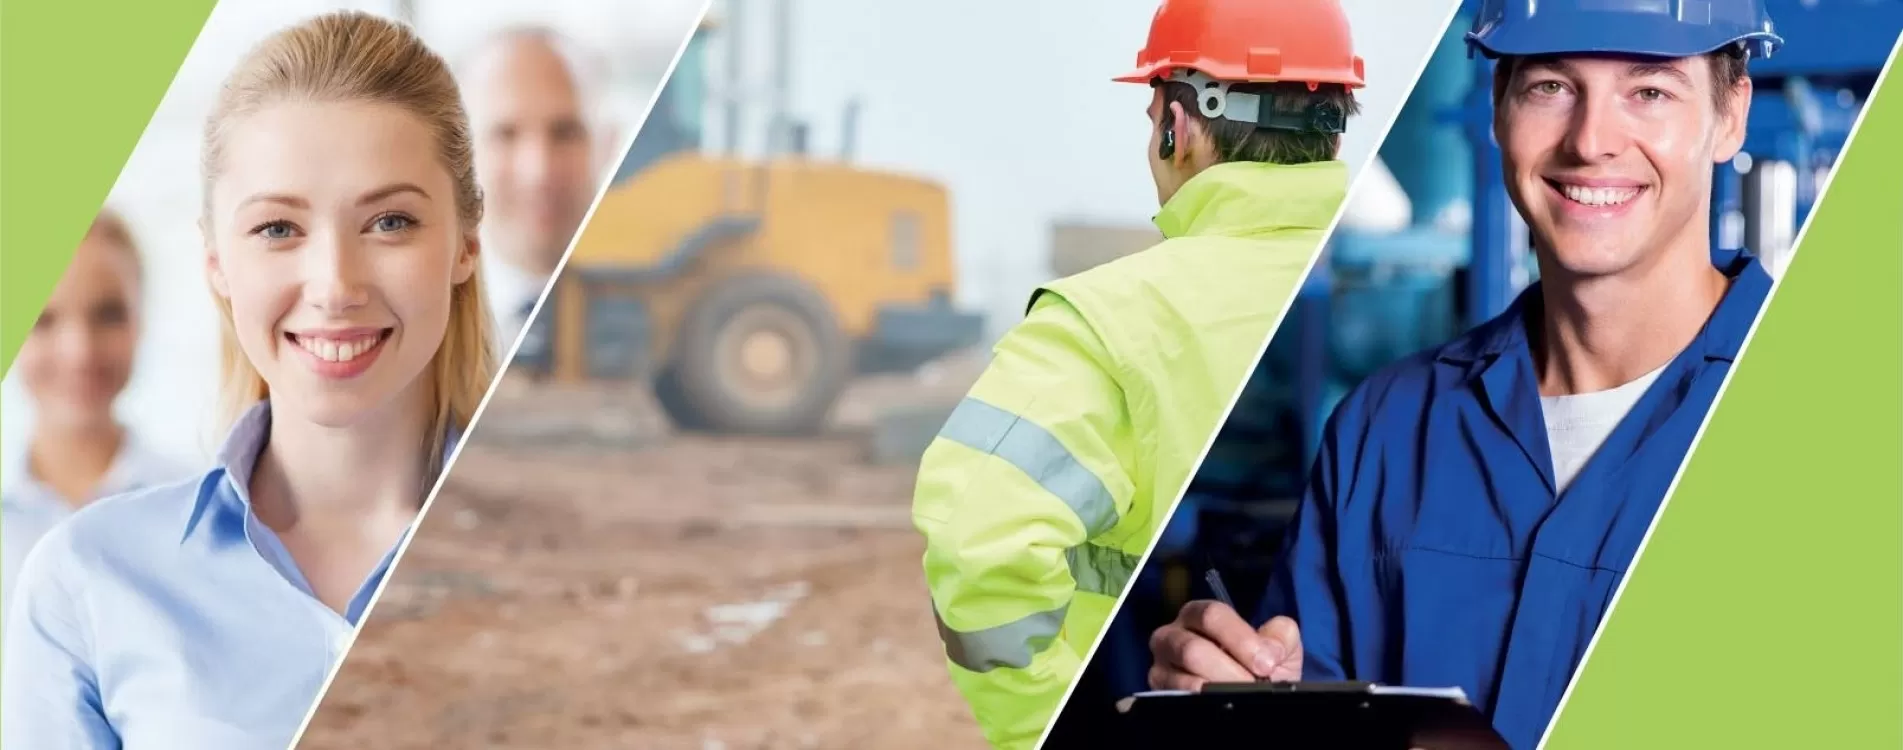 Health & Safety Consultancy Services in Worcester